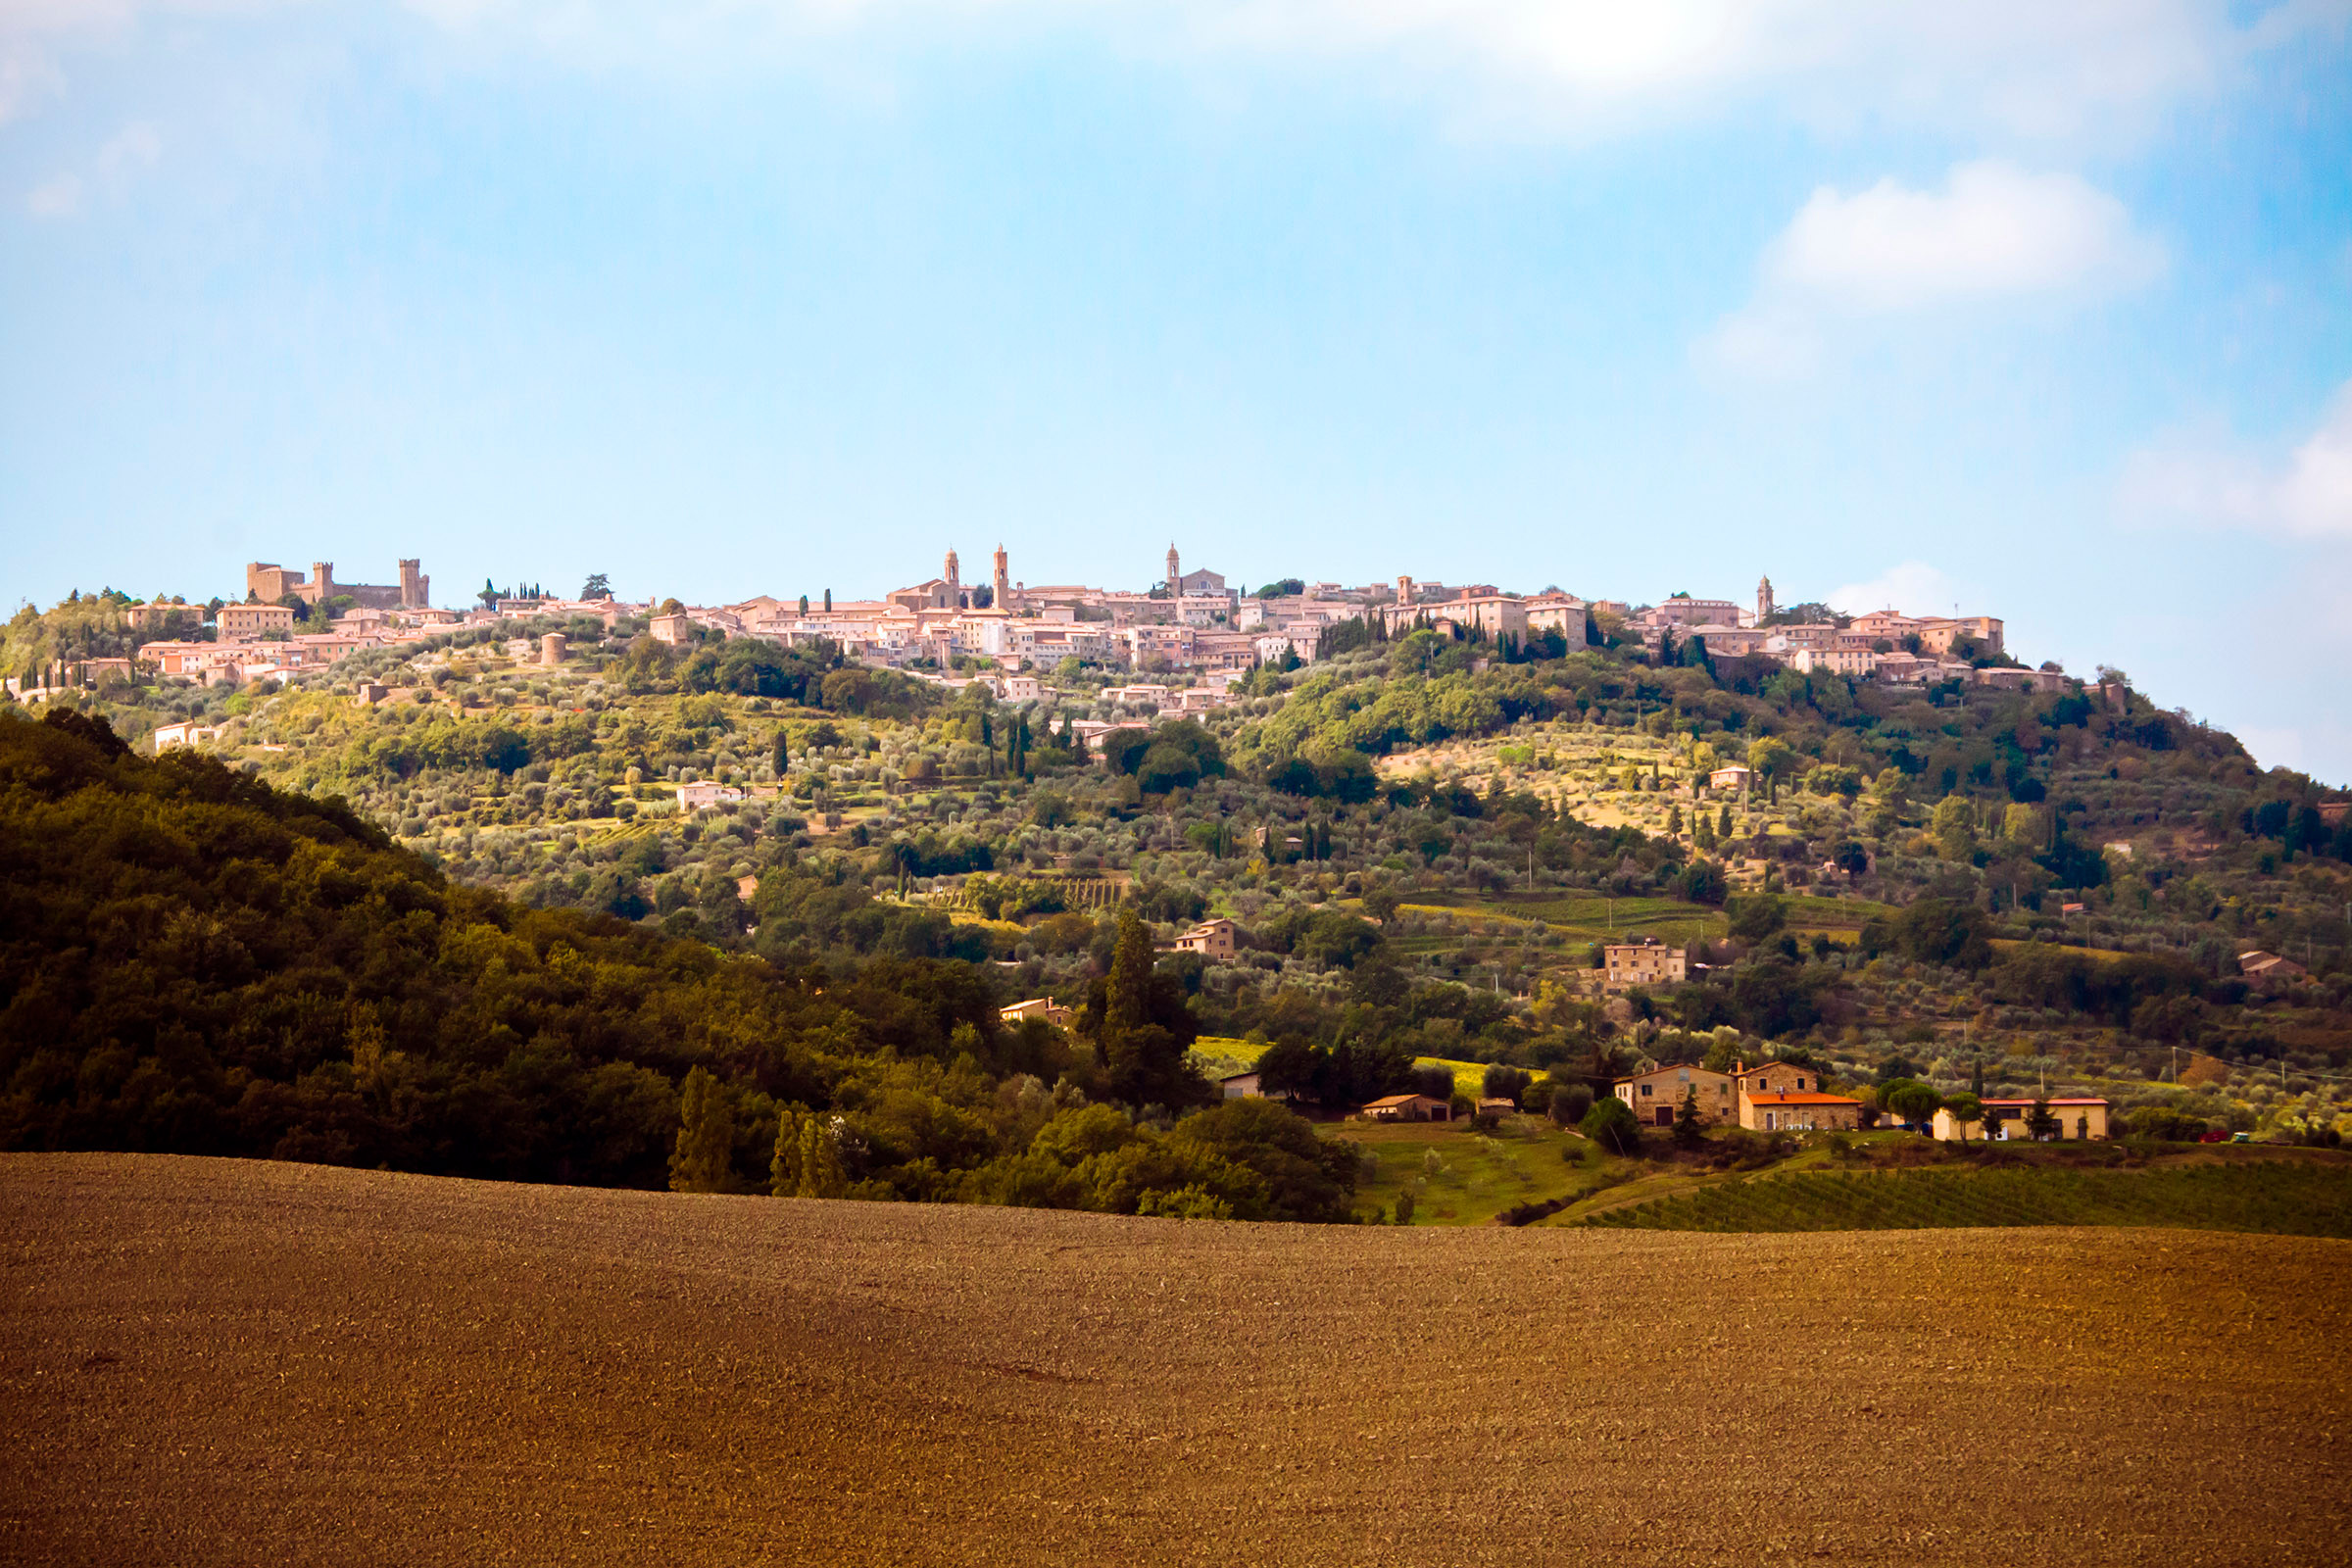 Montalcino in southern Tuscany